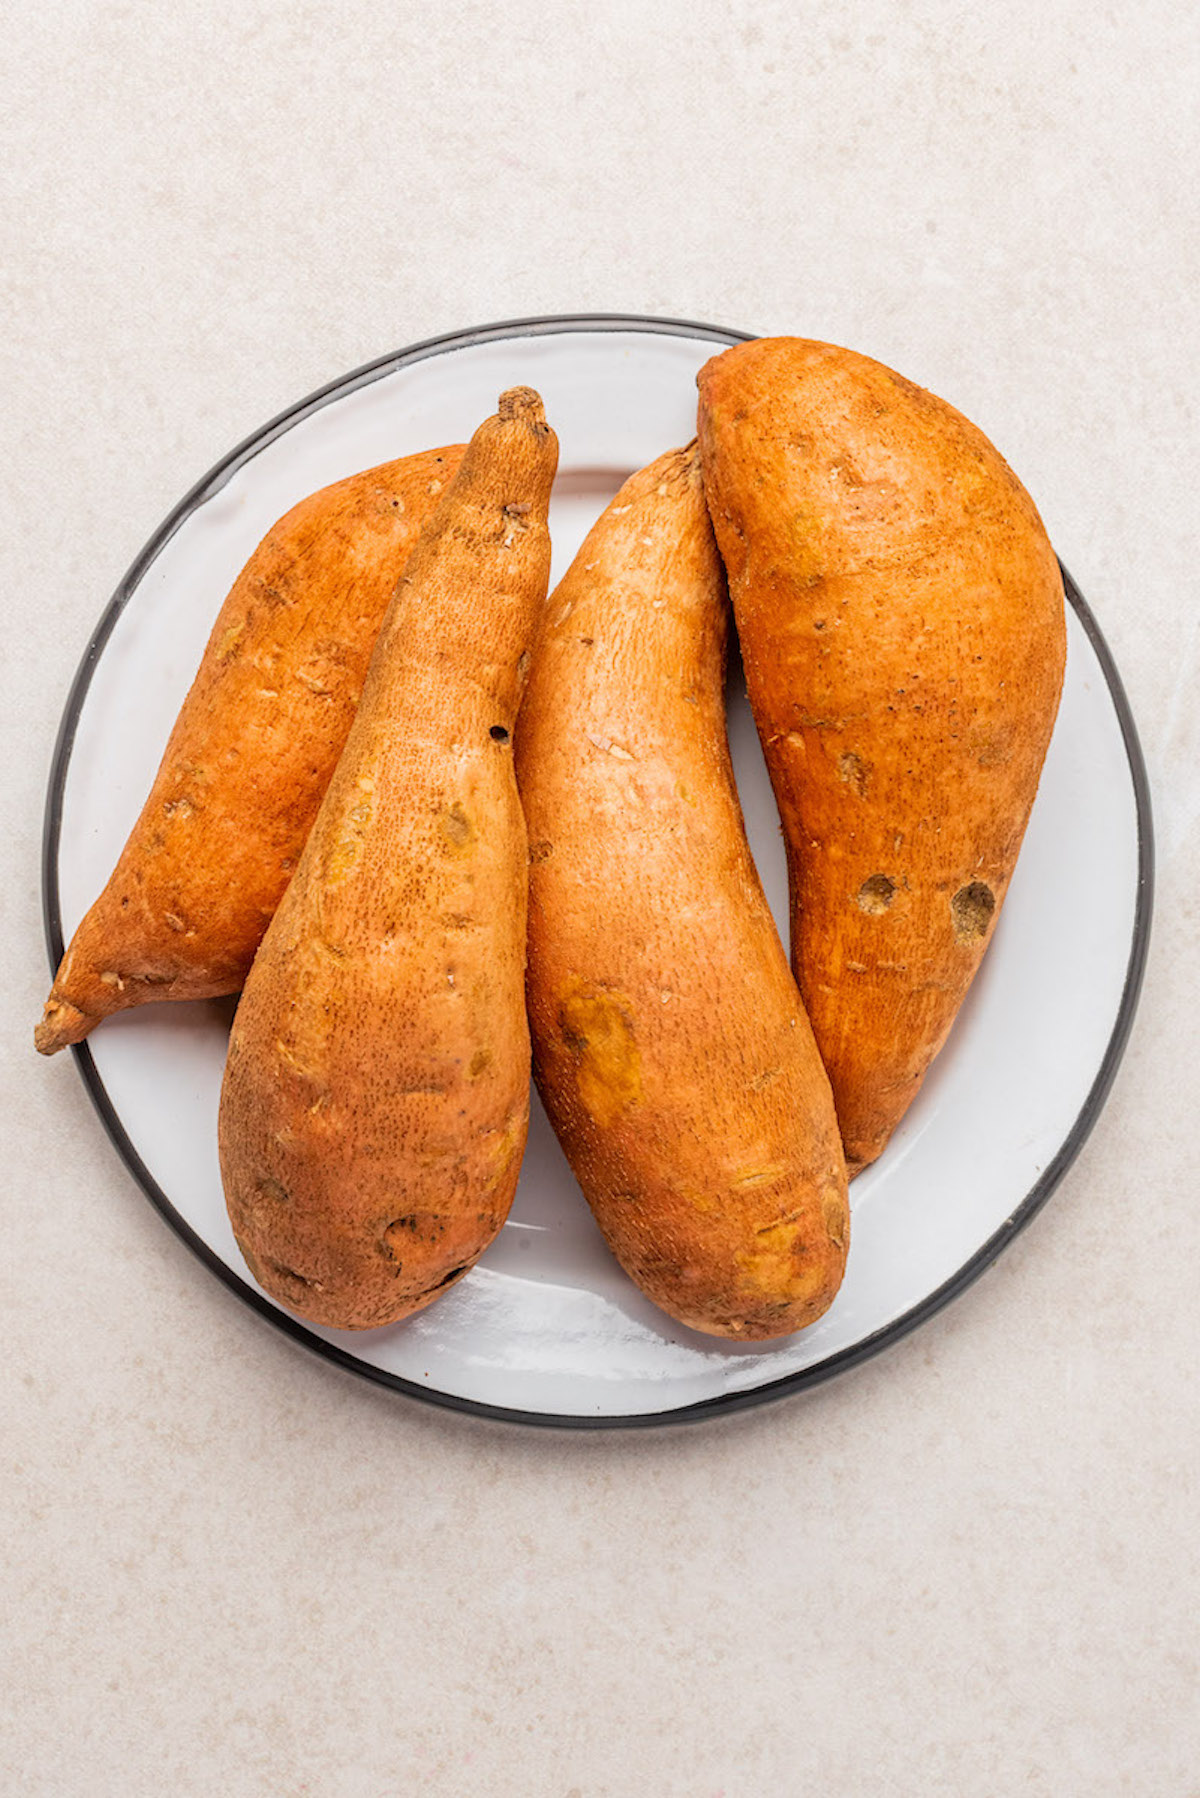 four sweet potatoes on a plate